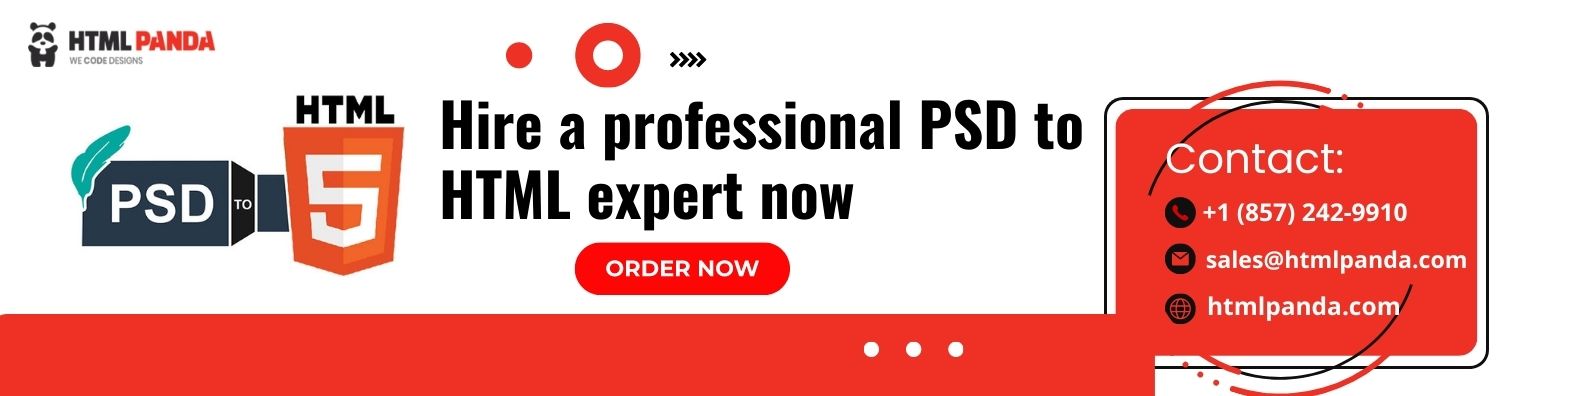 Hire a professional PSD to HTML expert now